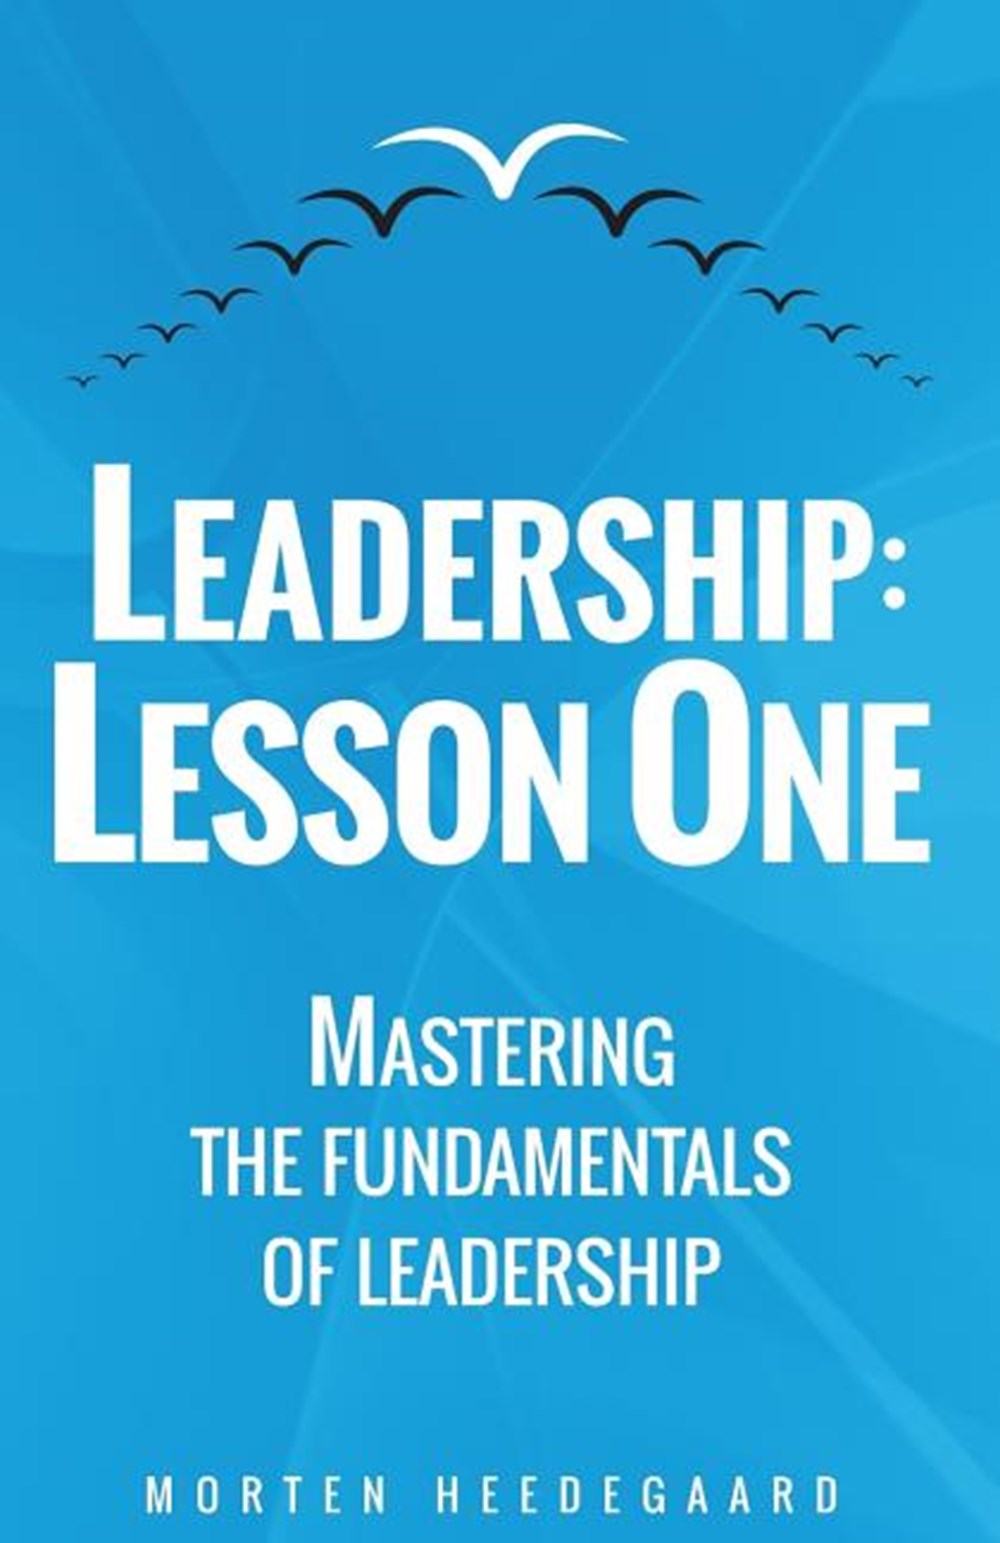 Leadership: Lesson One: Mastering the fundamentals of leadership